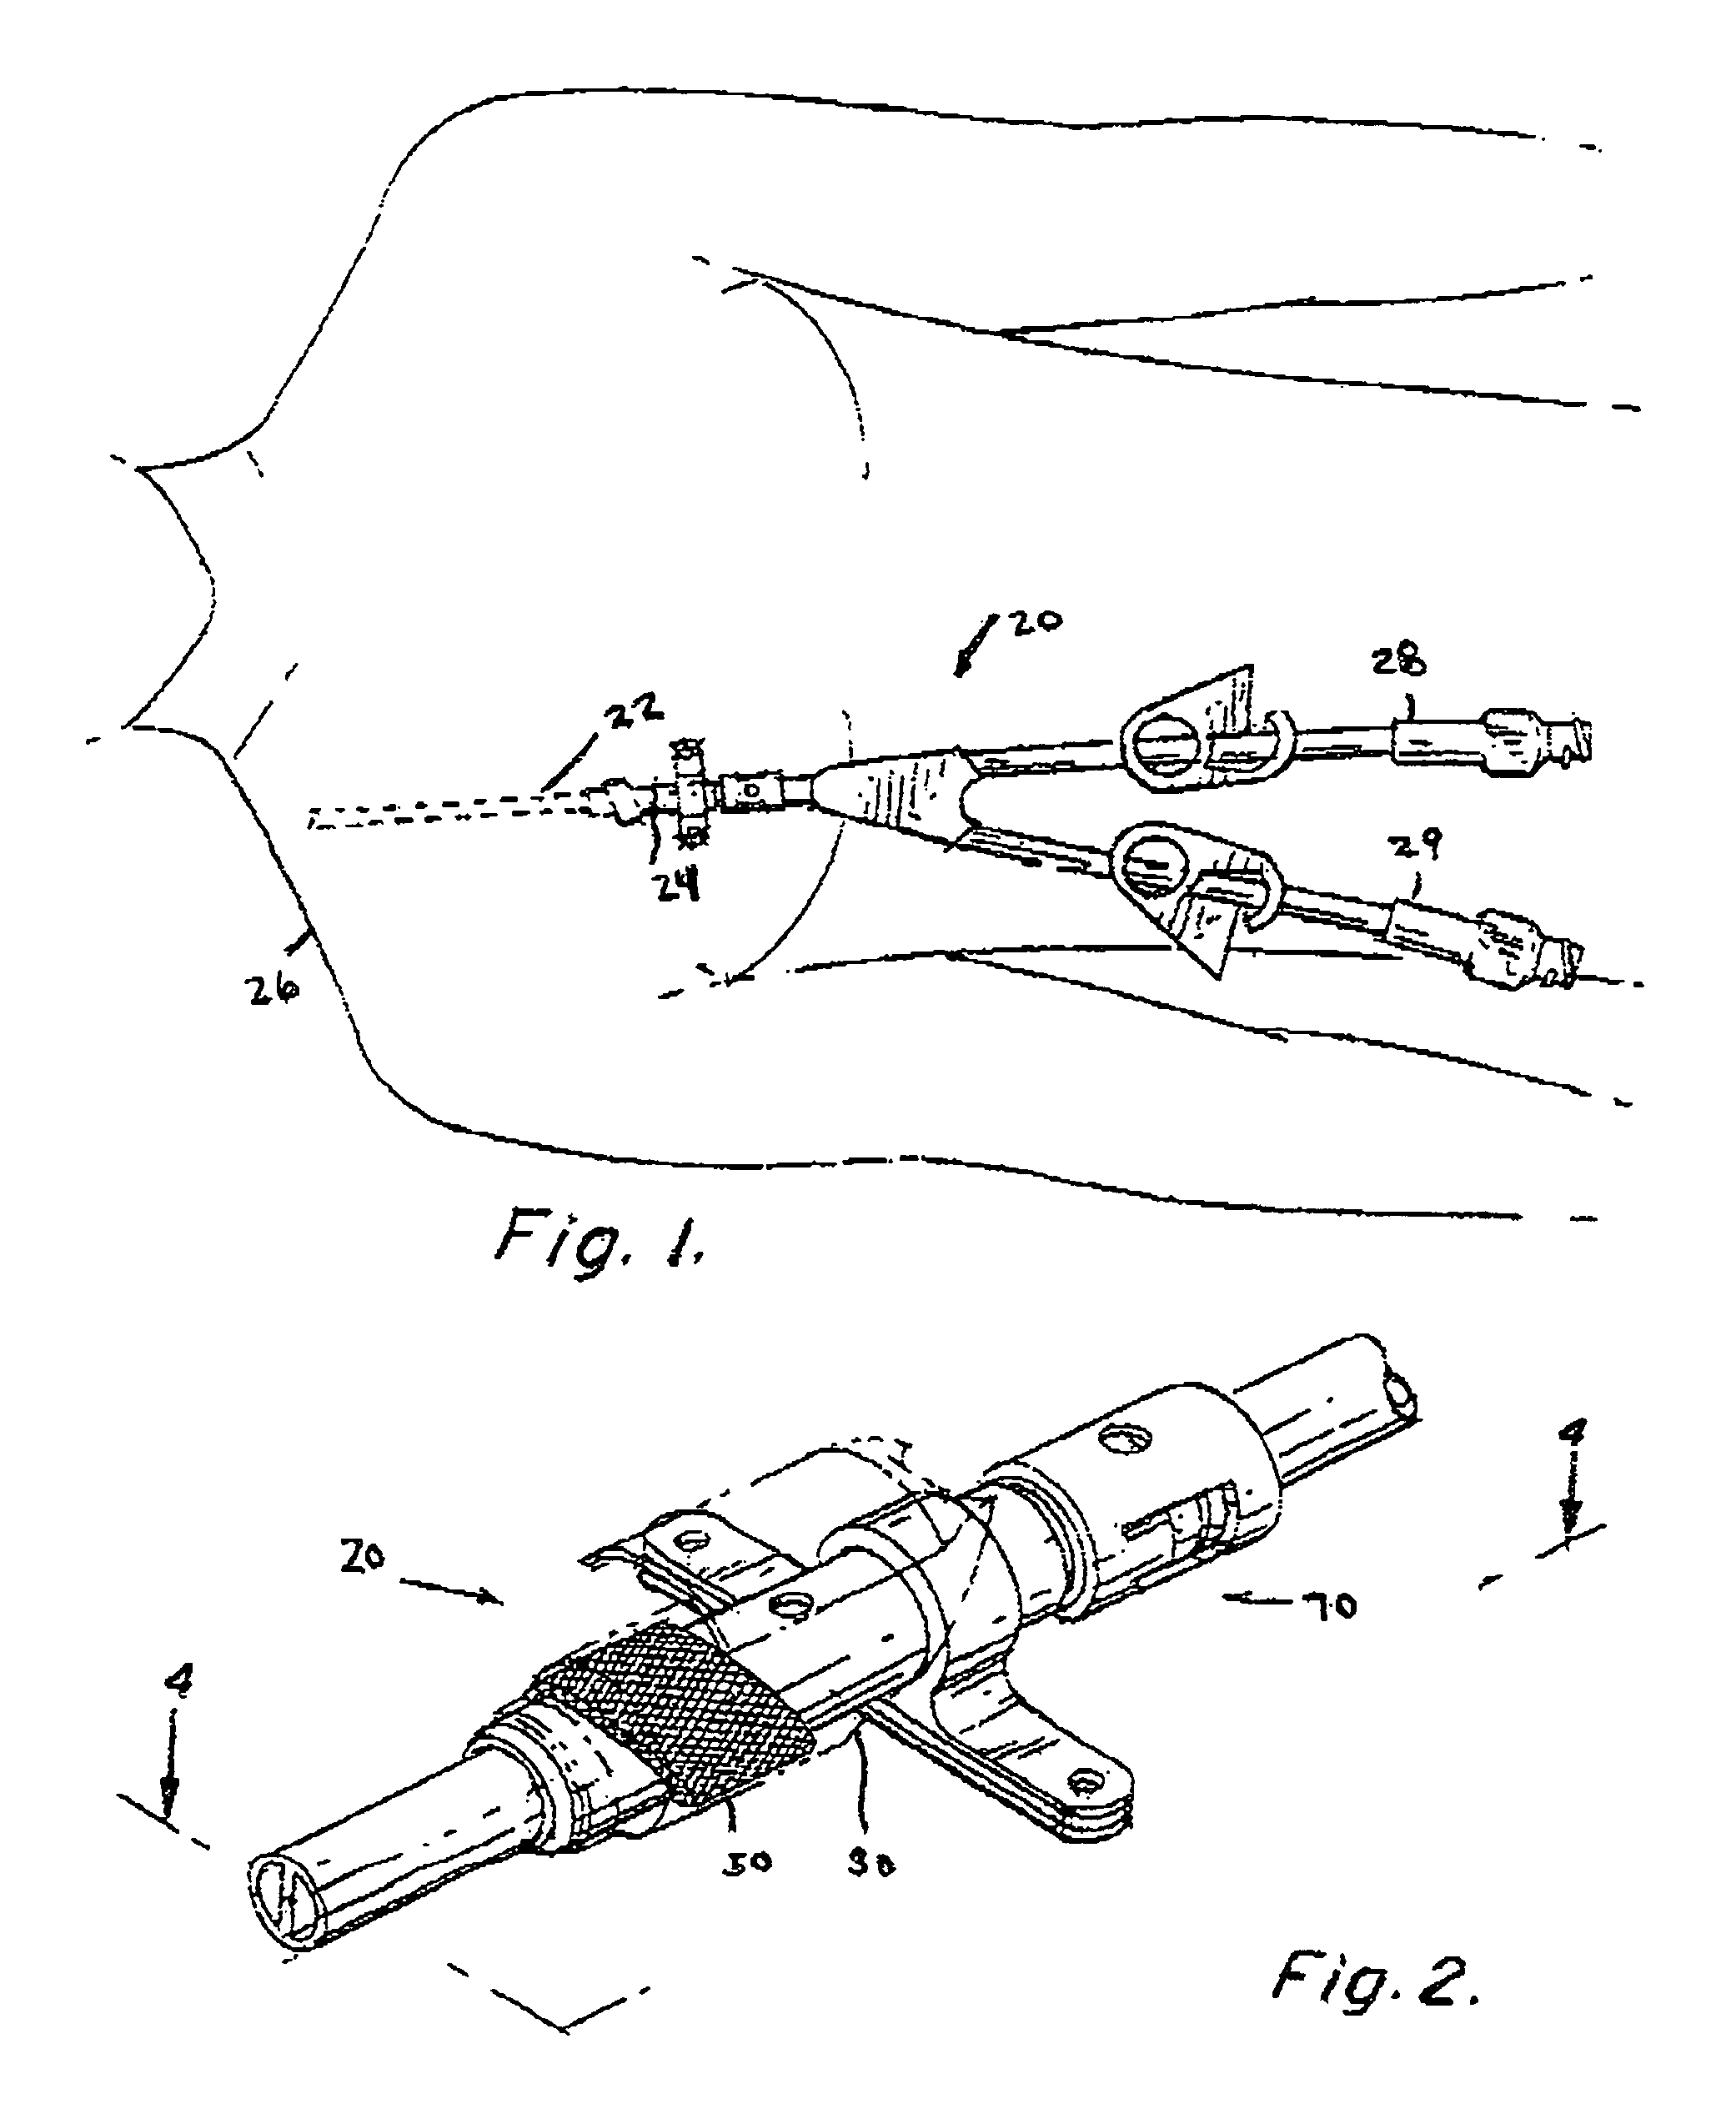 Apparatus and method for facilitating the replacement of an implanted catheter